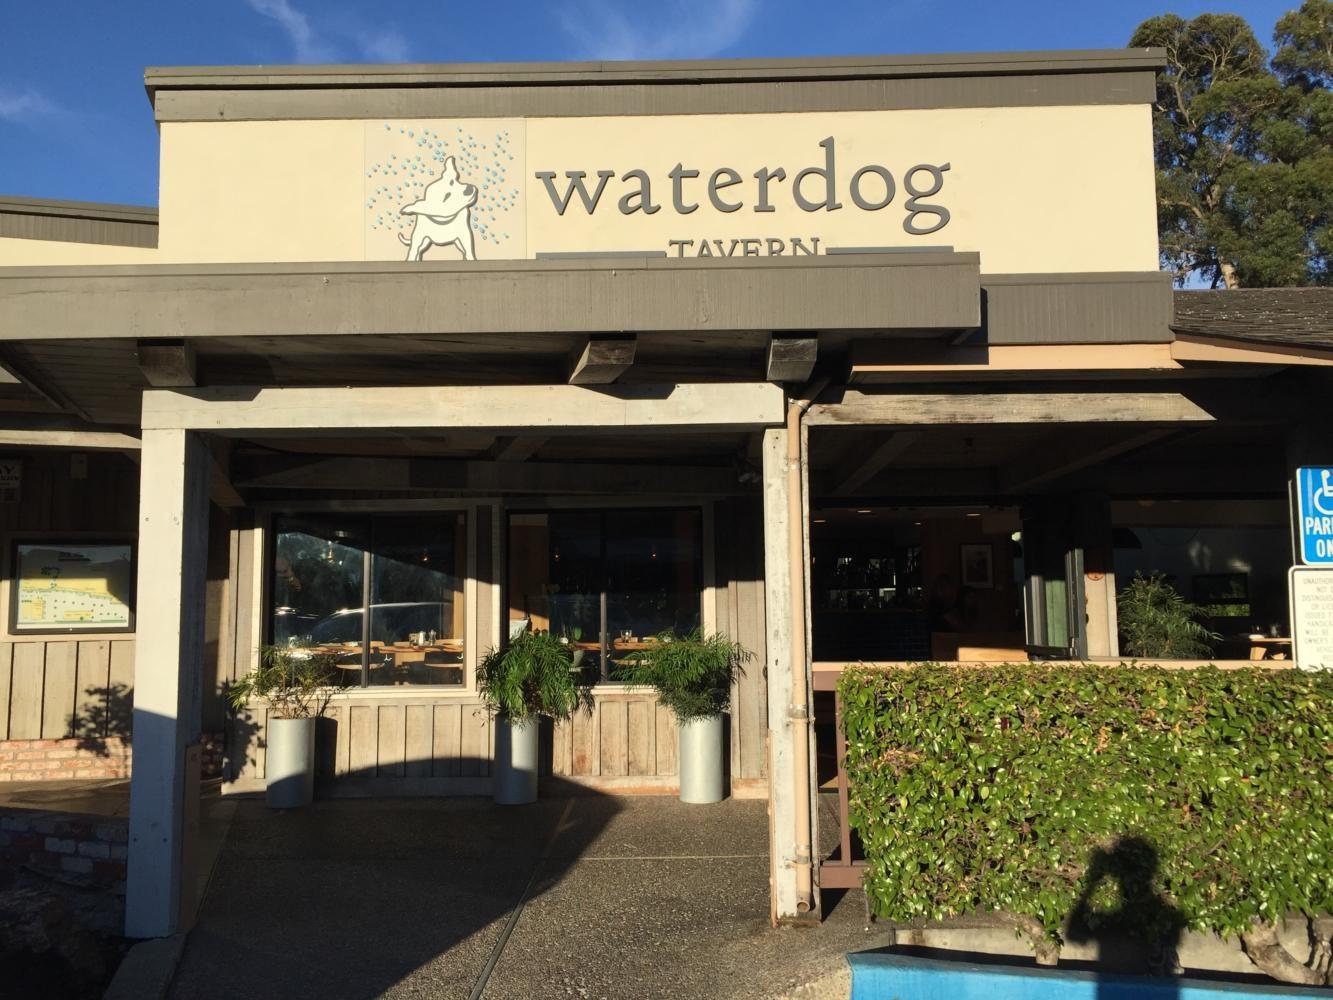 Waterdog+Tavern+in+the+Carlmont+shopping+center+employs+many+%0ACarlmont+students+as+hosts%2C+bussers%2C+and+servers+both+over+the+summer+and+during+the+school+year.